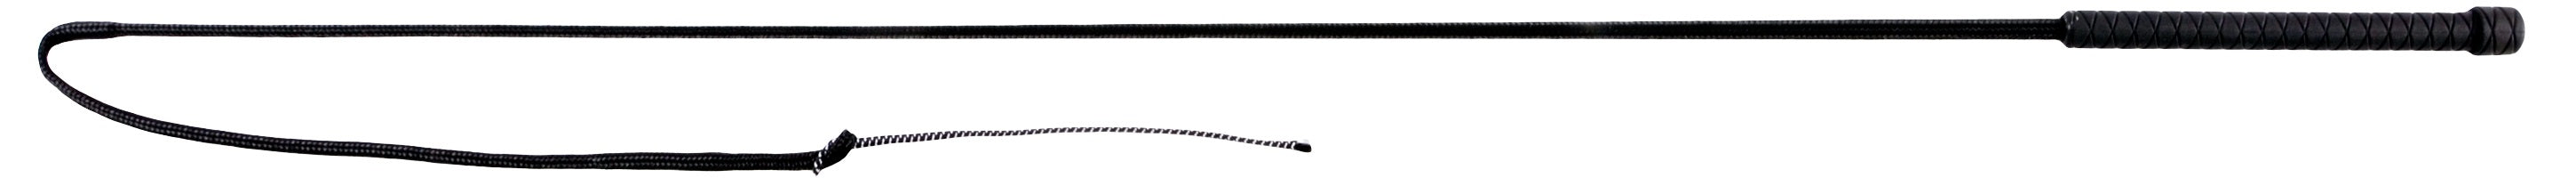 Inexpensive Buggy Carriage Whip | IVC Carriage